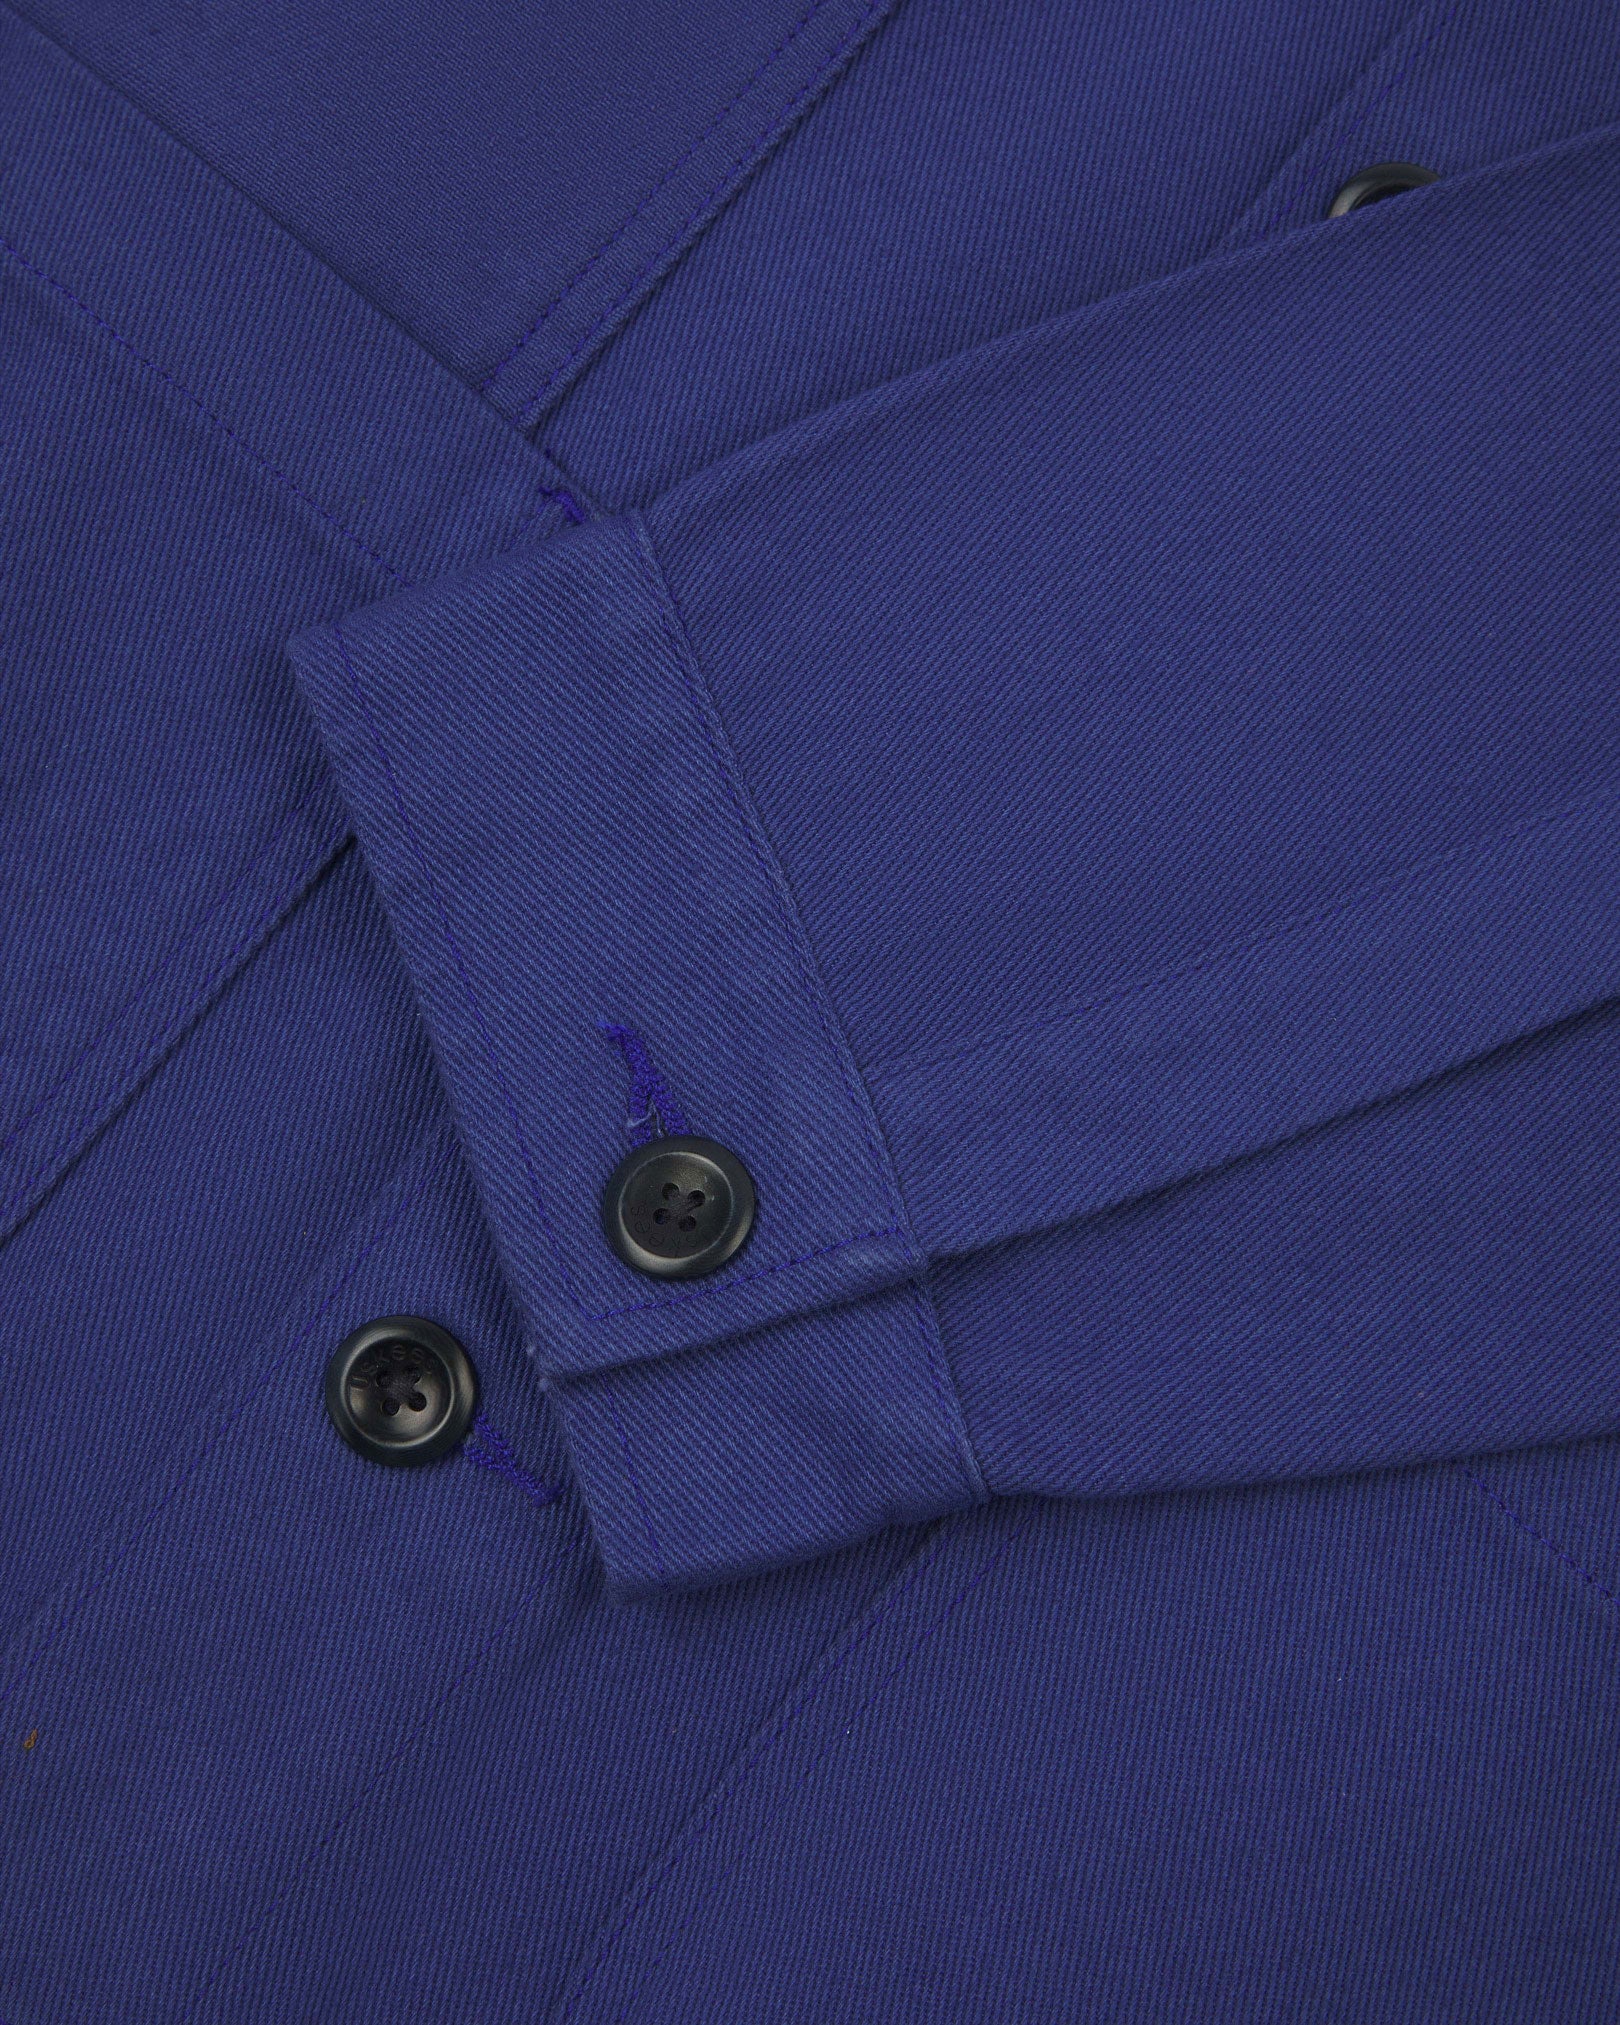 Closer detail view of multiple layered patch pockets, cuff detailing, corozo buttons and extra durable weave of the organic cotton drill fabric.